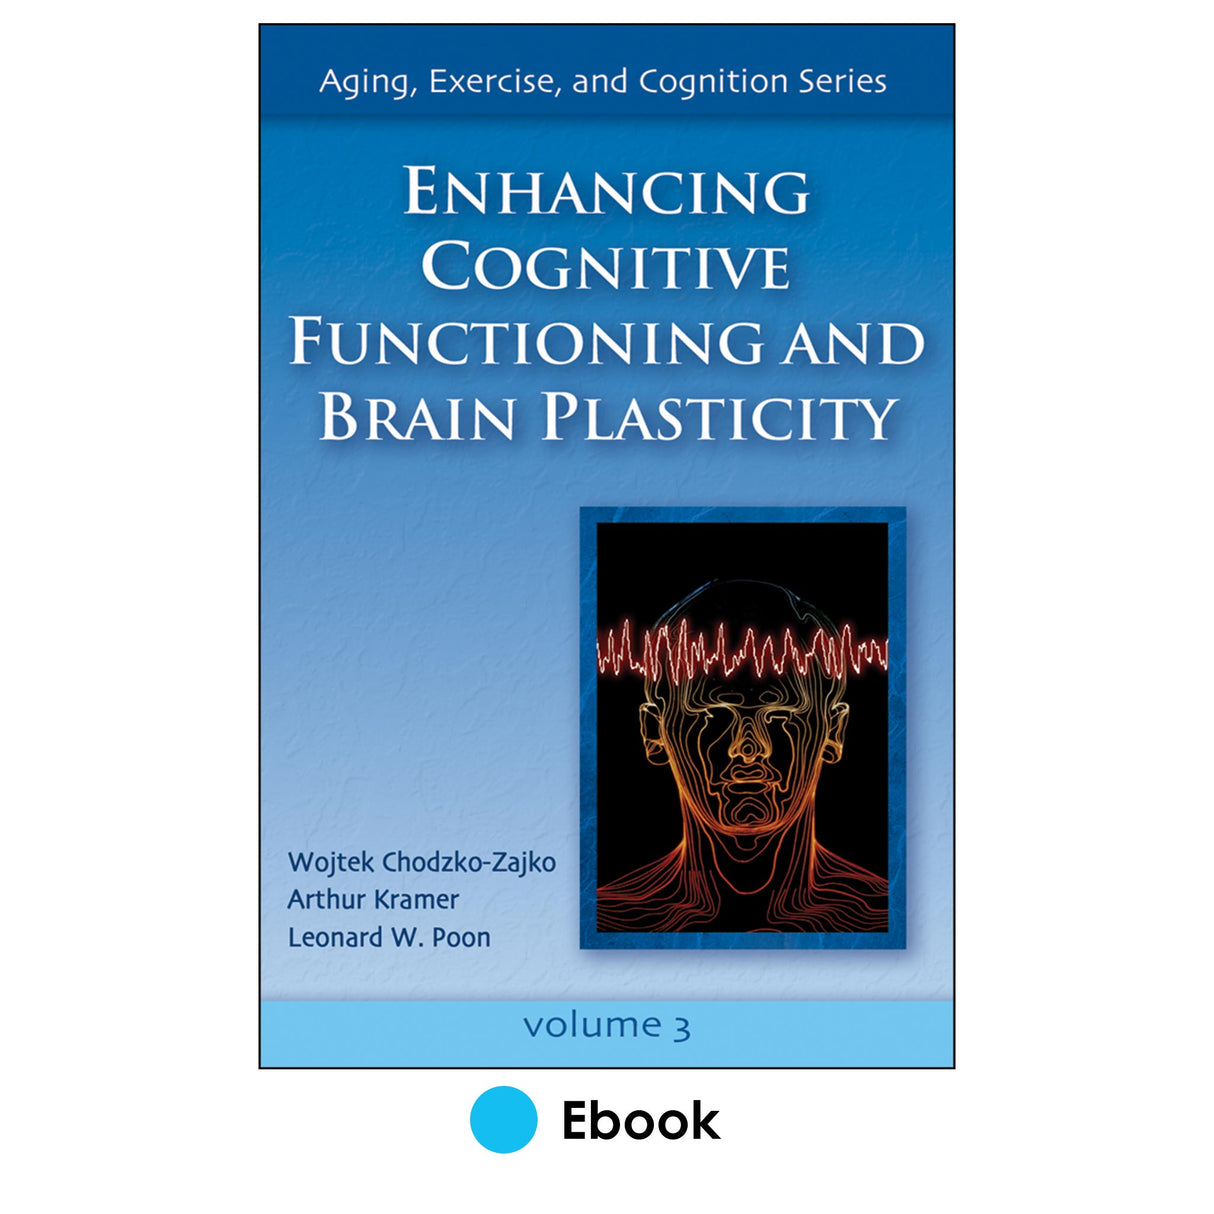 Enhancing Cognitive Functioning and Brain Plasticity PDF